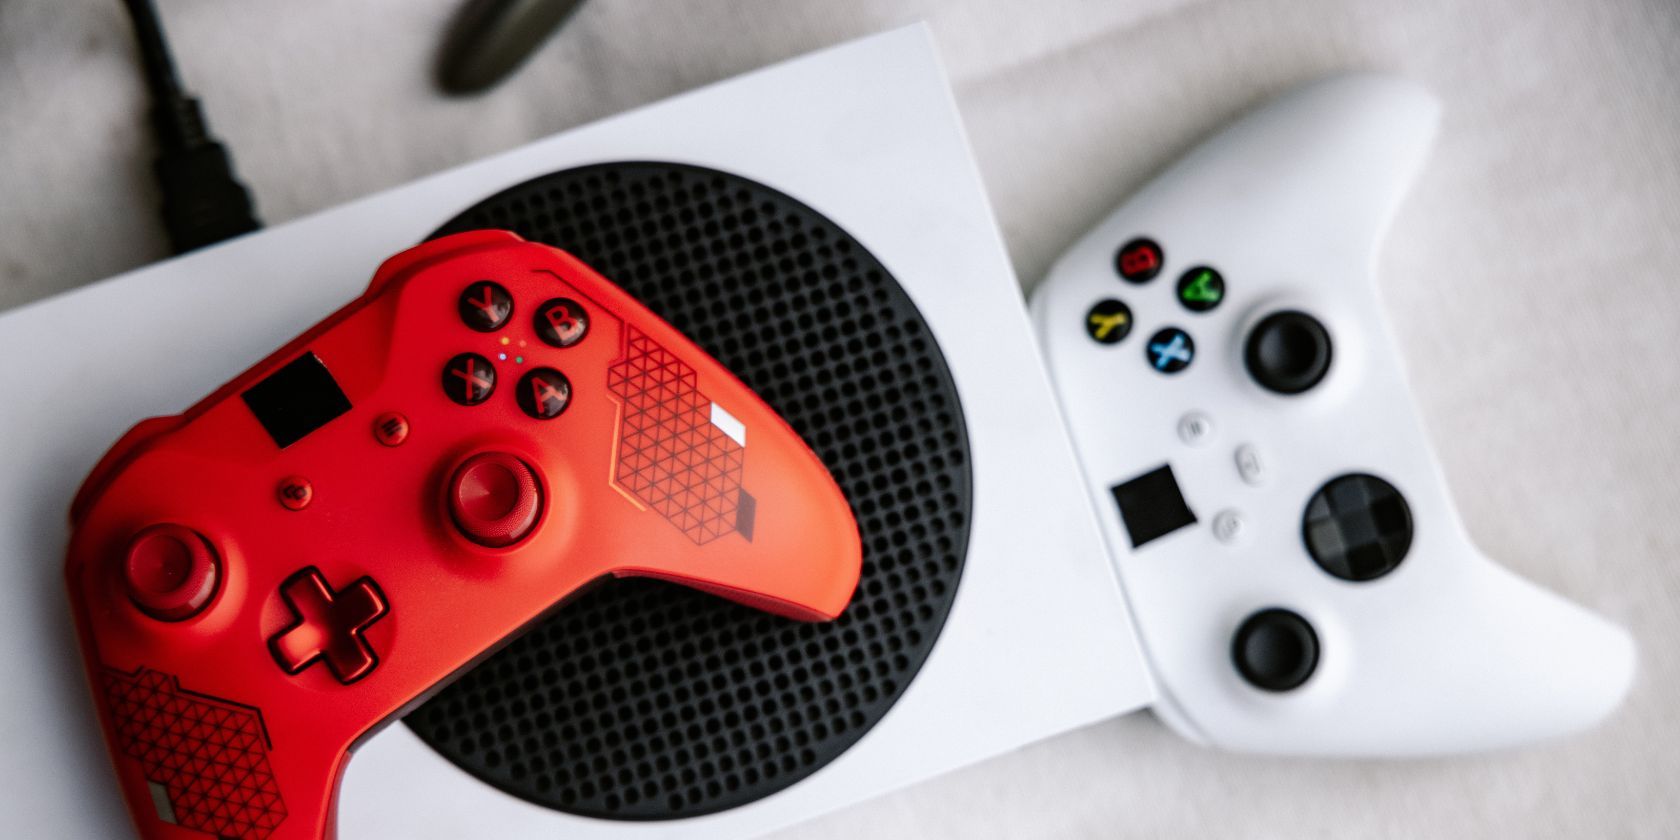 An Xbox One Series S with a red controller on top of it and a white controller nearby